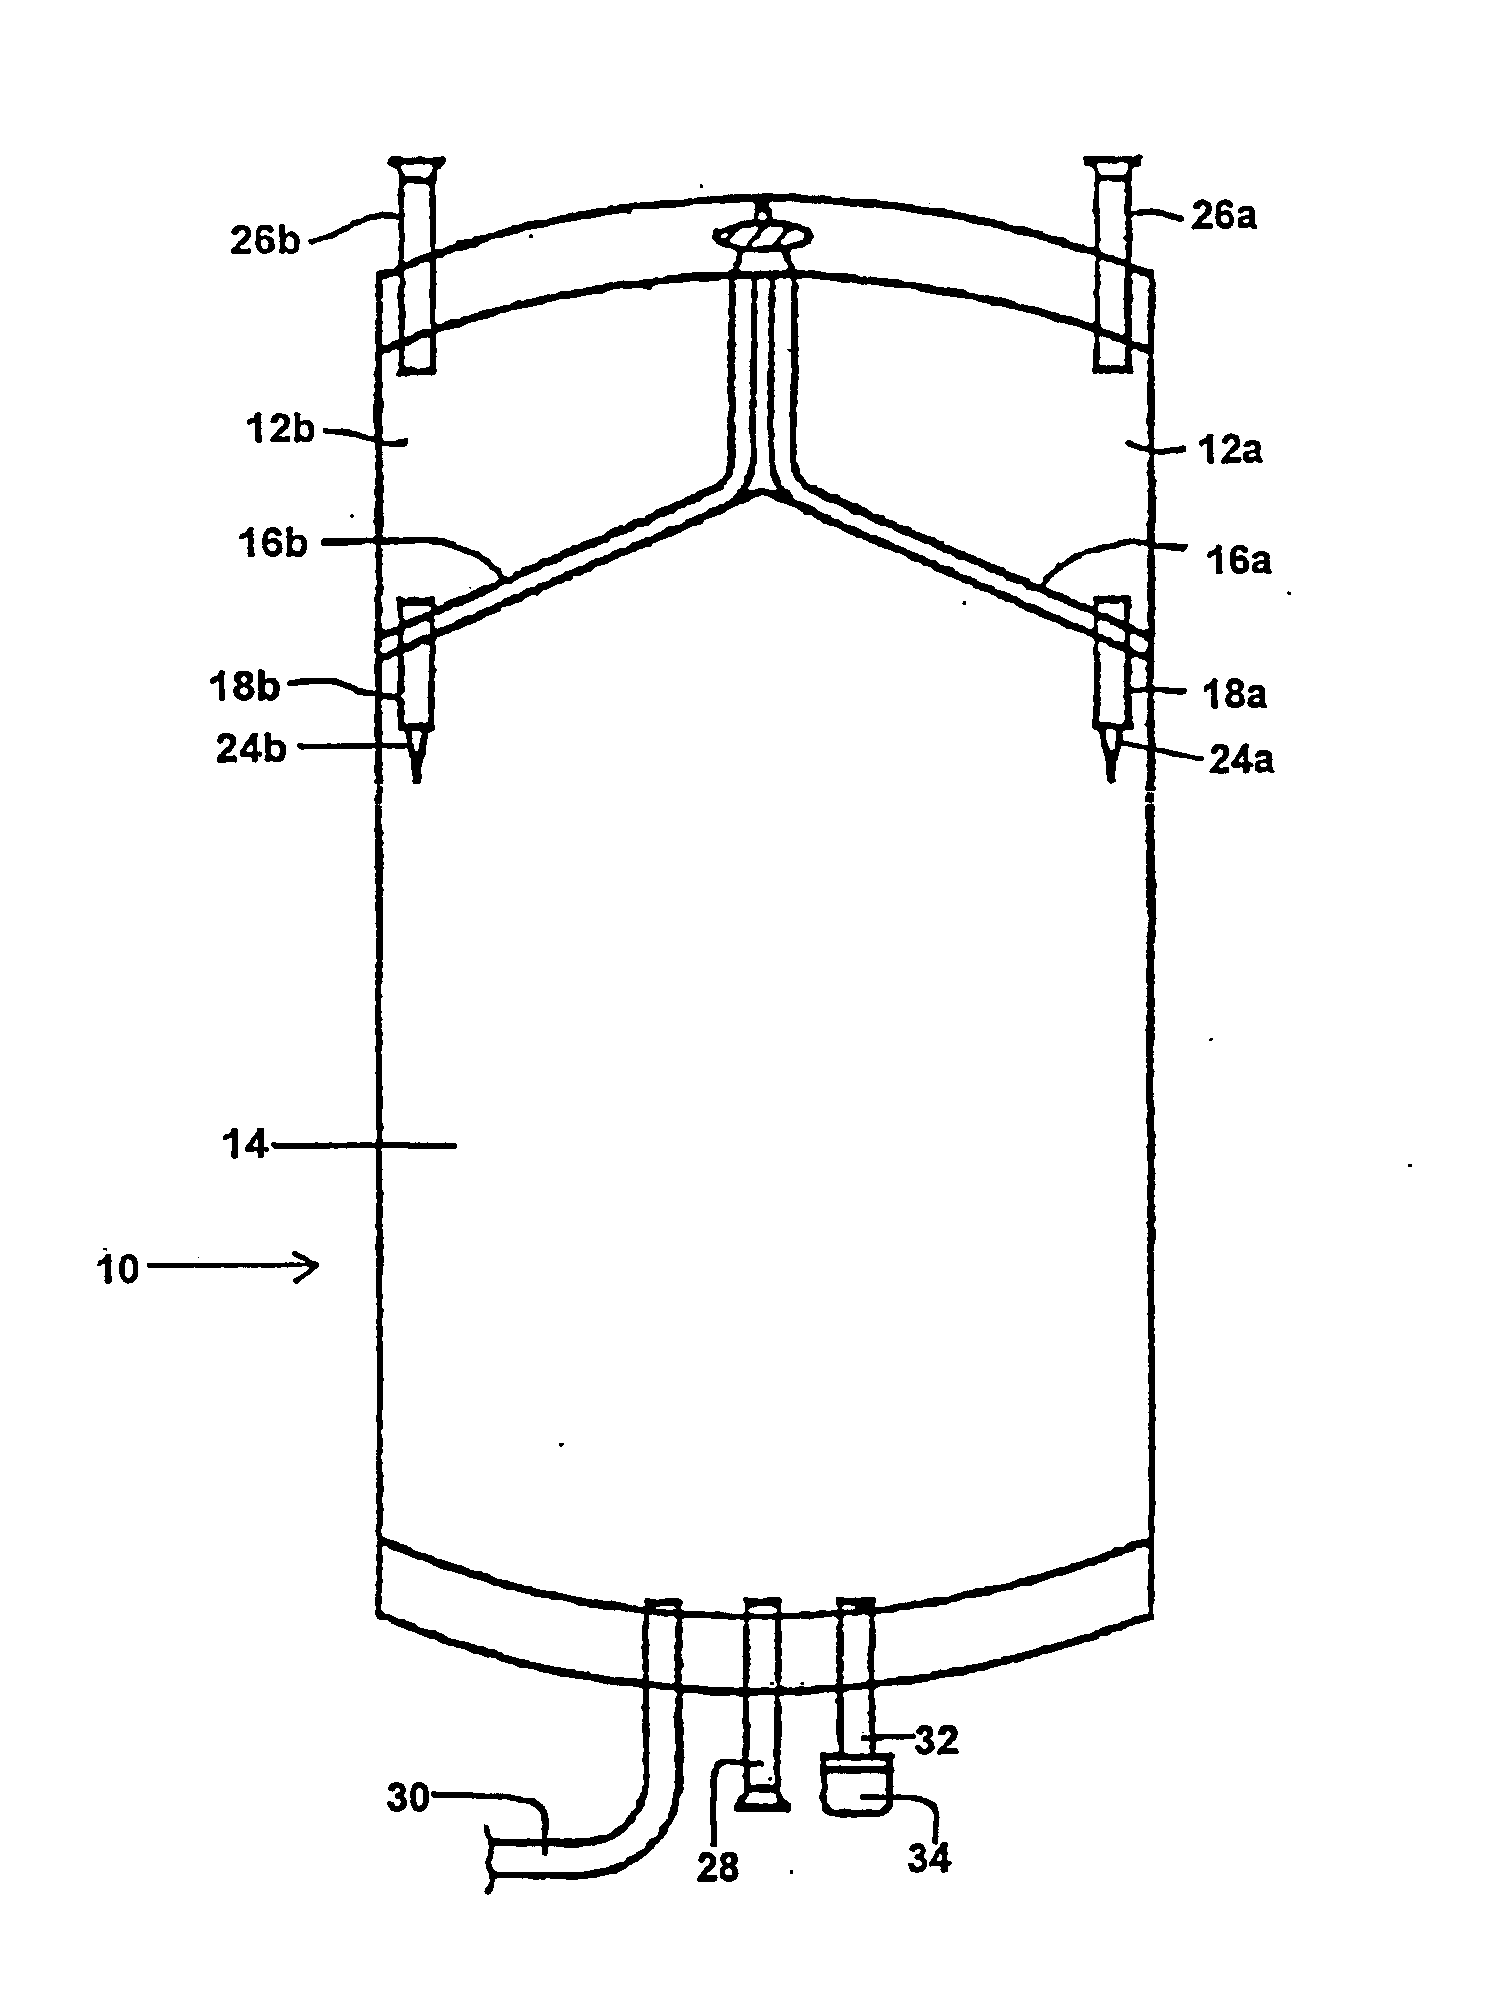 Multiple compartment bag assembly for dialysis fluid